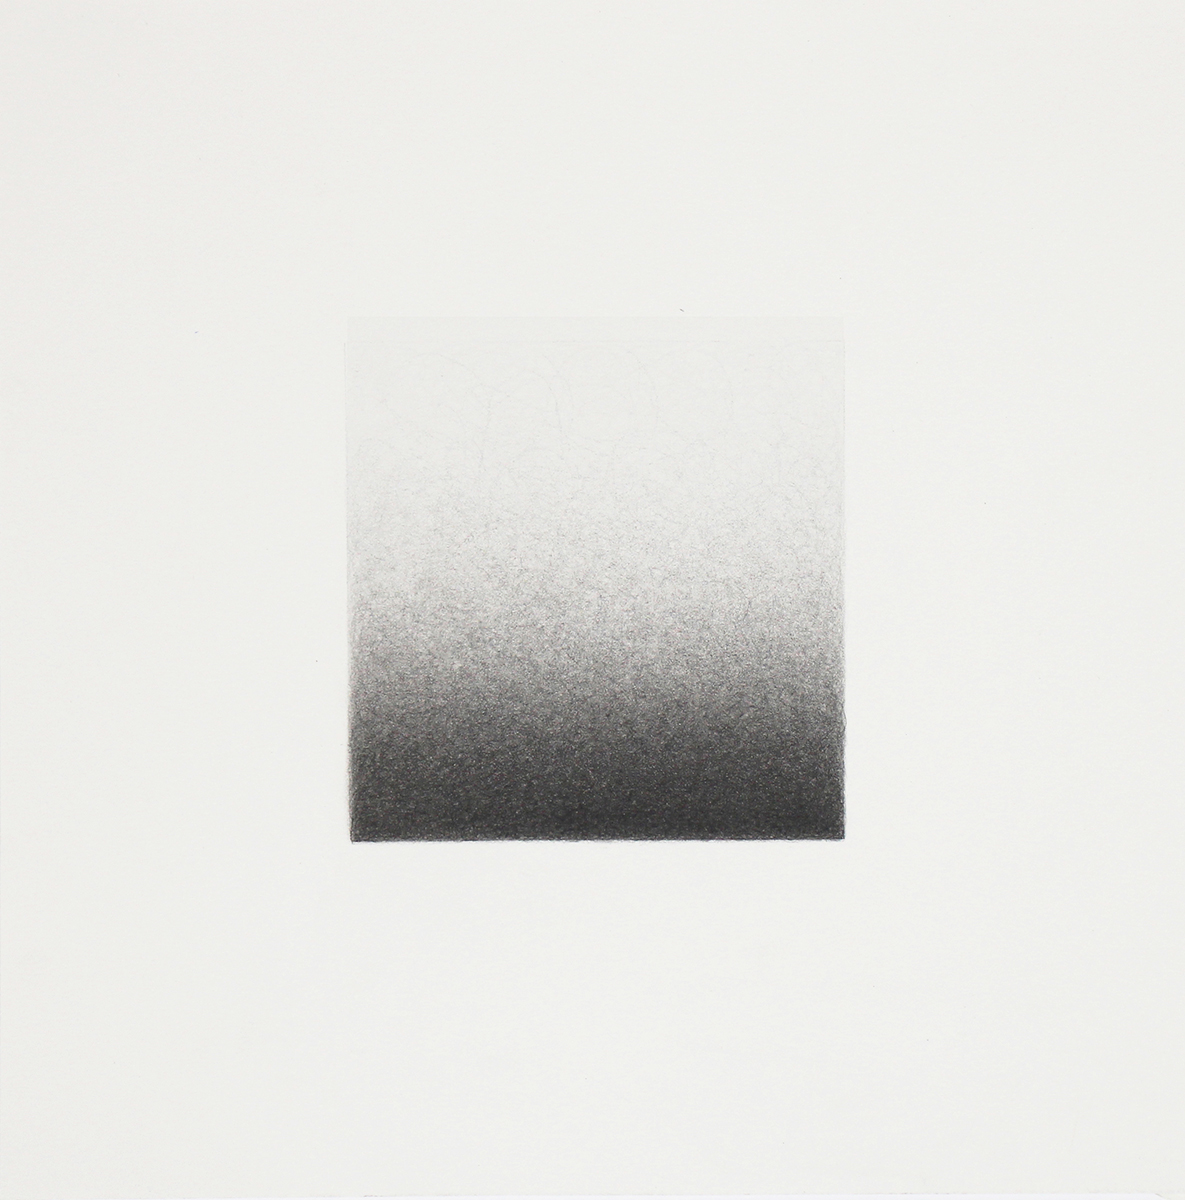 Floating Square (Black 1), 2024, colored pencil on paper, 10 x 10"